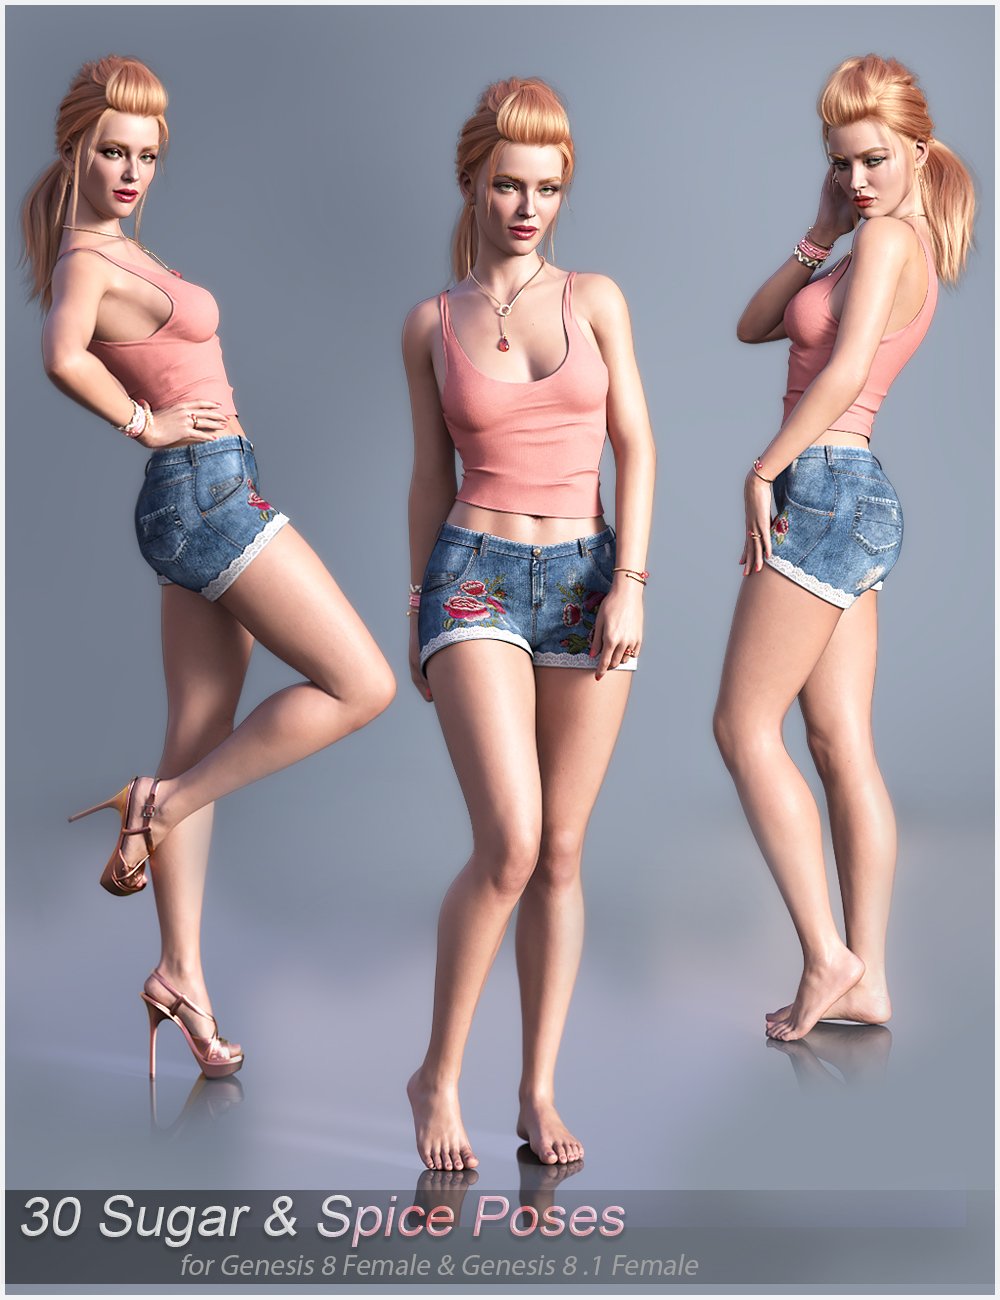 V Sugar and Spice Poses for Genesis 8 and 8.1 Female by: Valery3D, 3D Models by Daz 3D